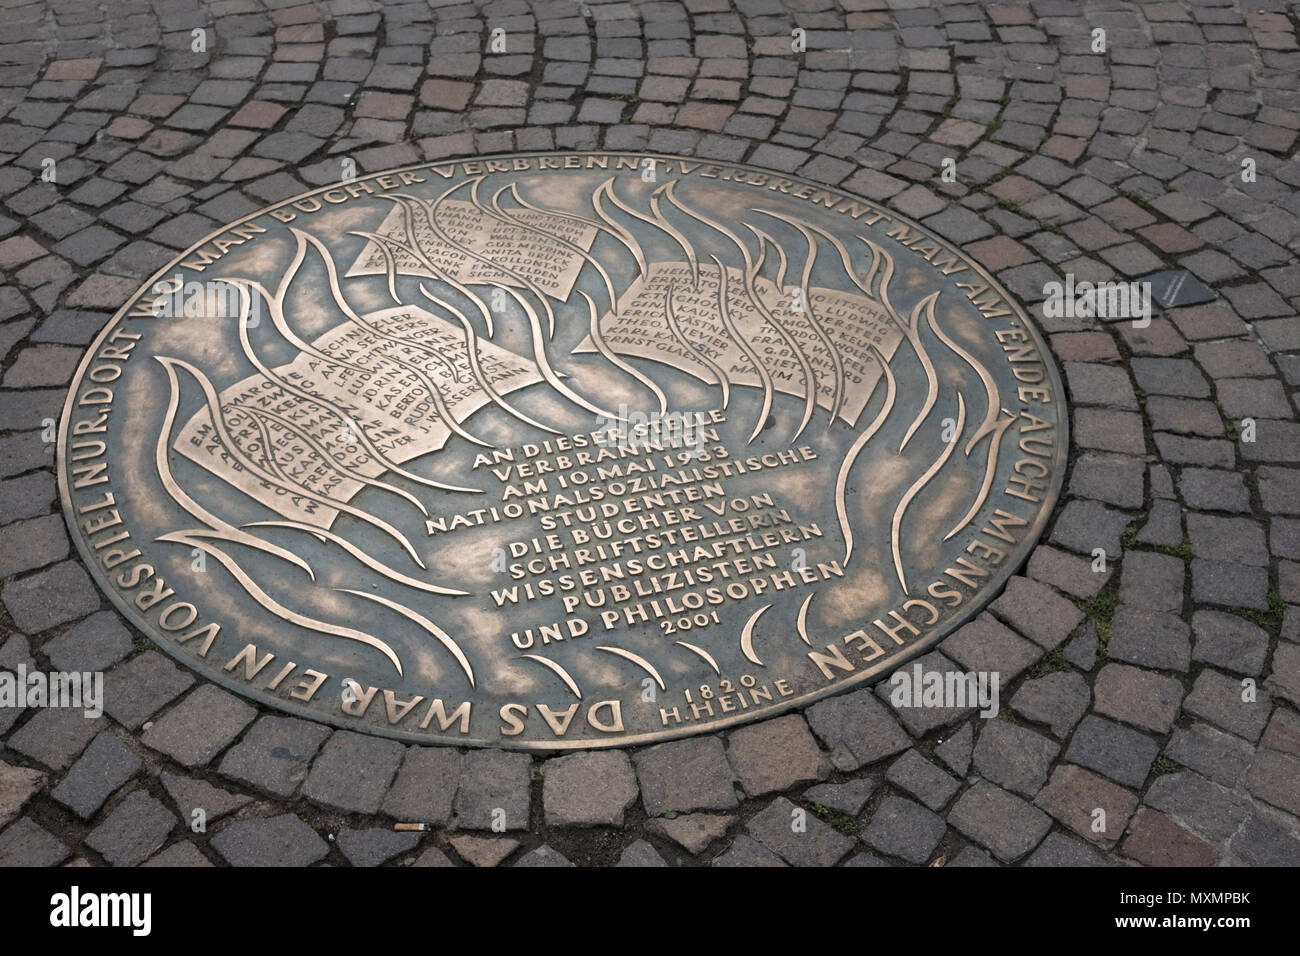 Commemorative plaque in Romerberg, Frankfurt am Main, Hesse, Germany, to remember book burning by Nazi supporters on 10 May 1933. Stock Photo